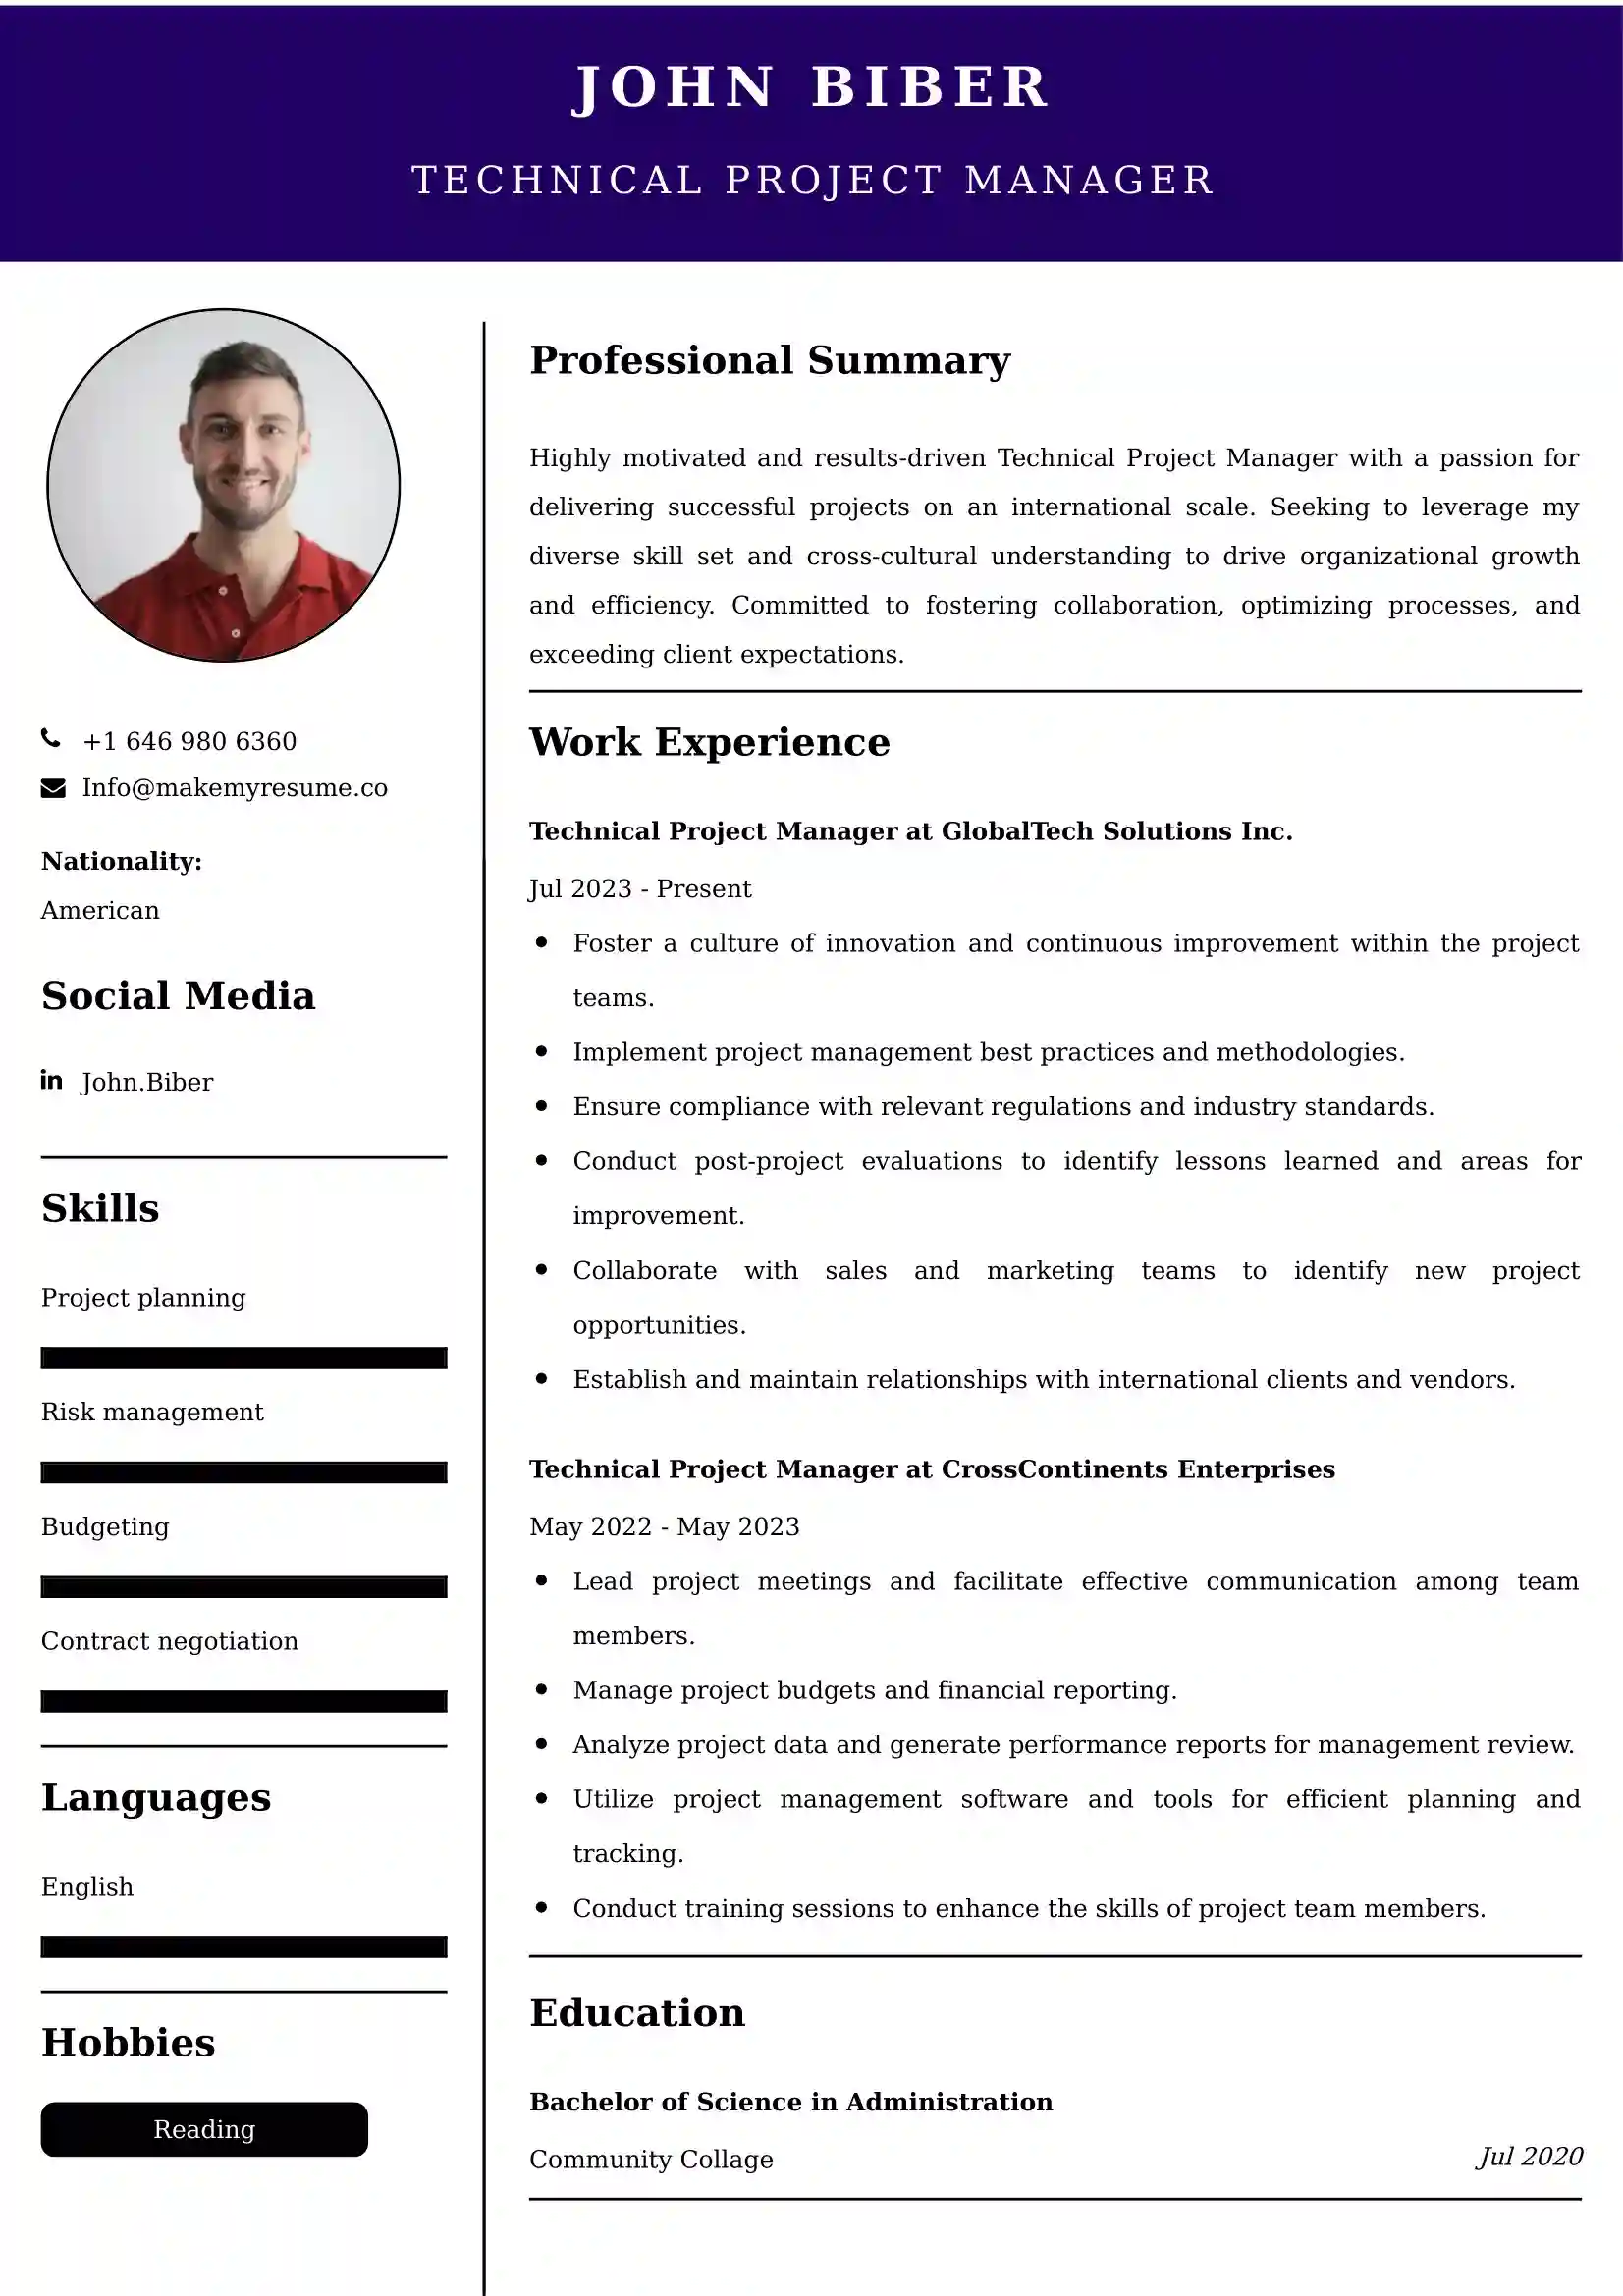 Technical Project Manager Resume Examples - UK Format, Latest Template.